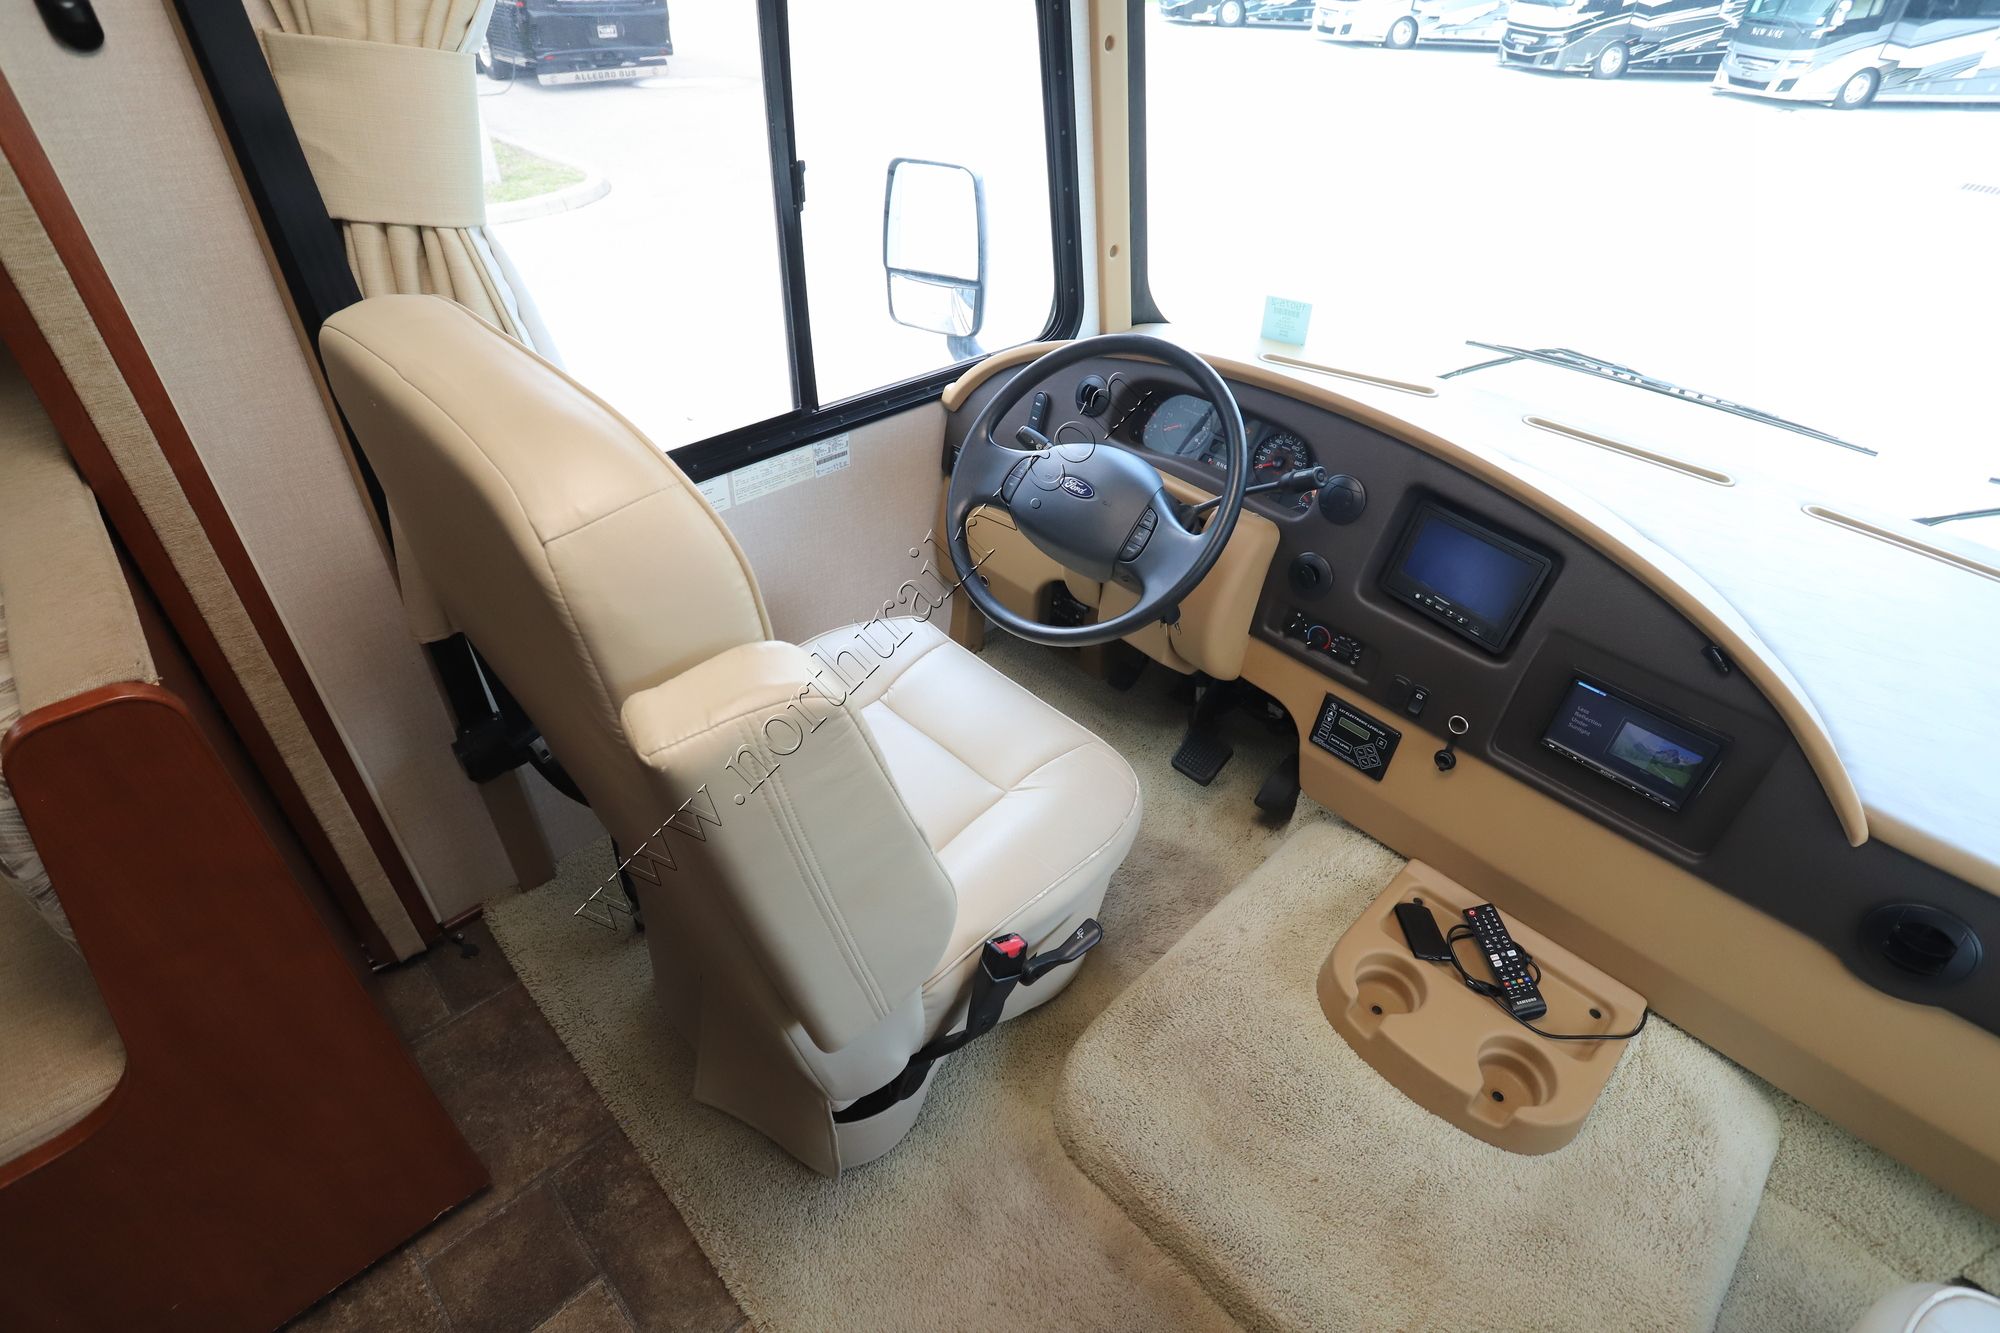 Used 2014 Itasca Sunstar 26HE Class A  For Sale